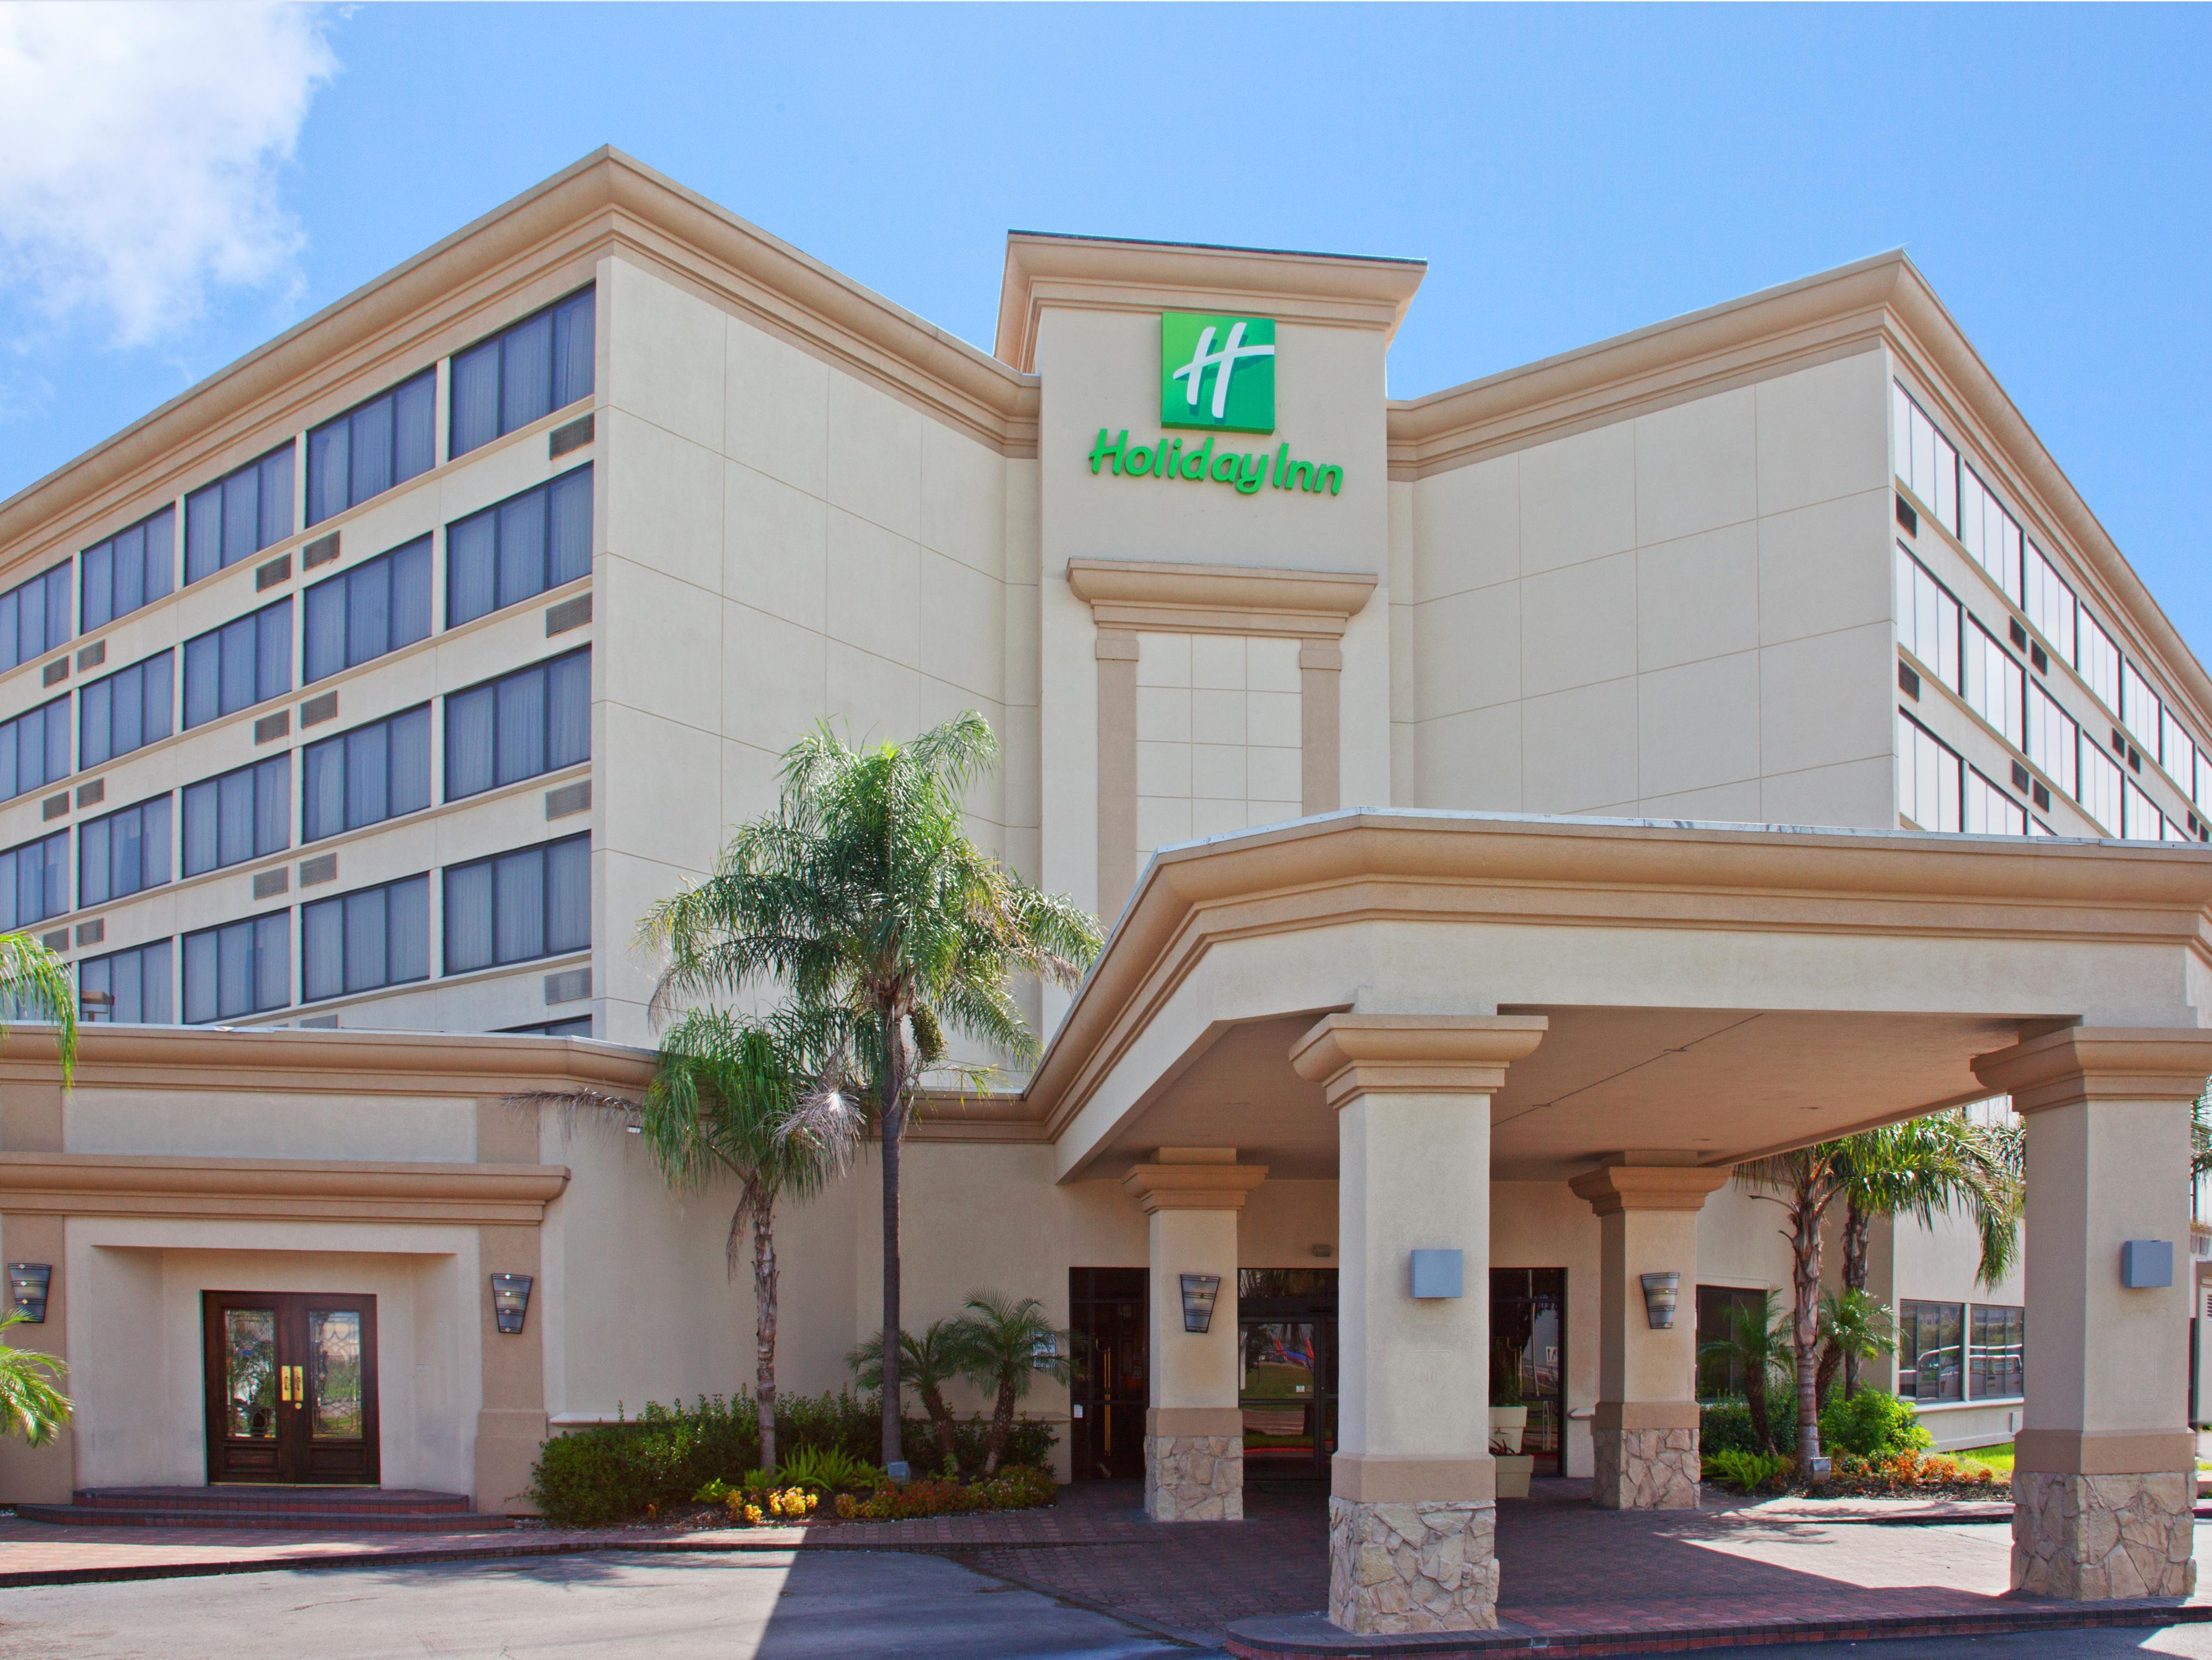 Our Holiday Inn hotel Houston Hobby Airport is surrounded by popular local attractions including the Houston Children’s Museum, Galleria Shopping Center, NASA’s Johnson Space Center, and many more.